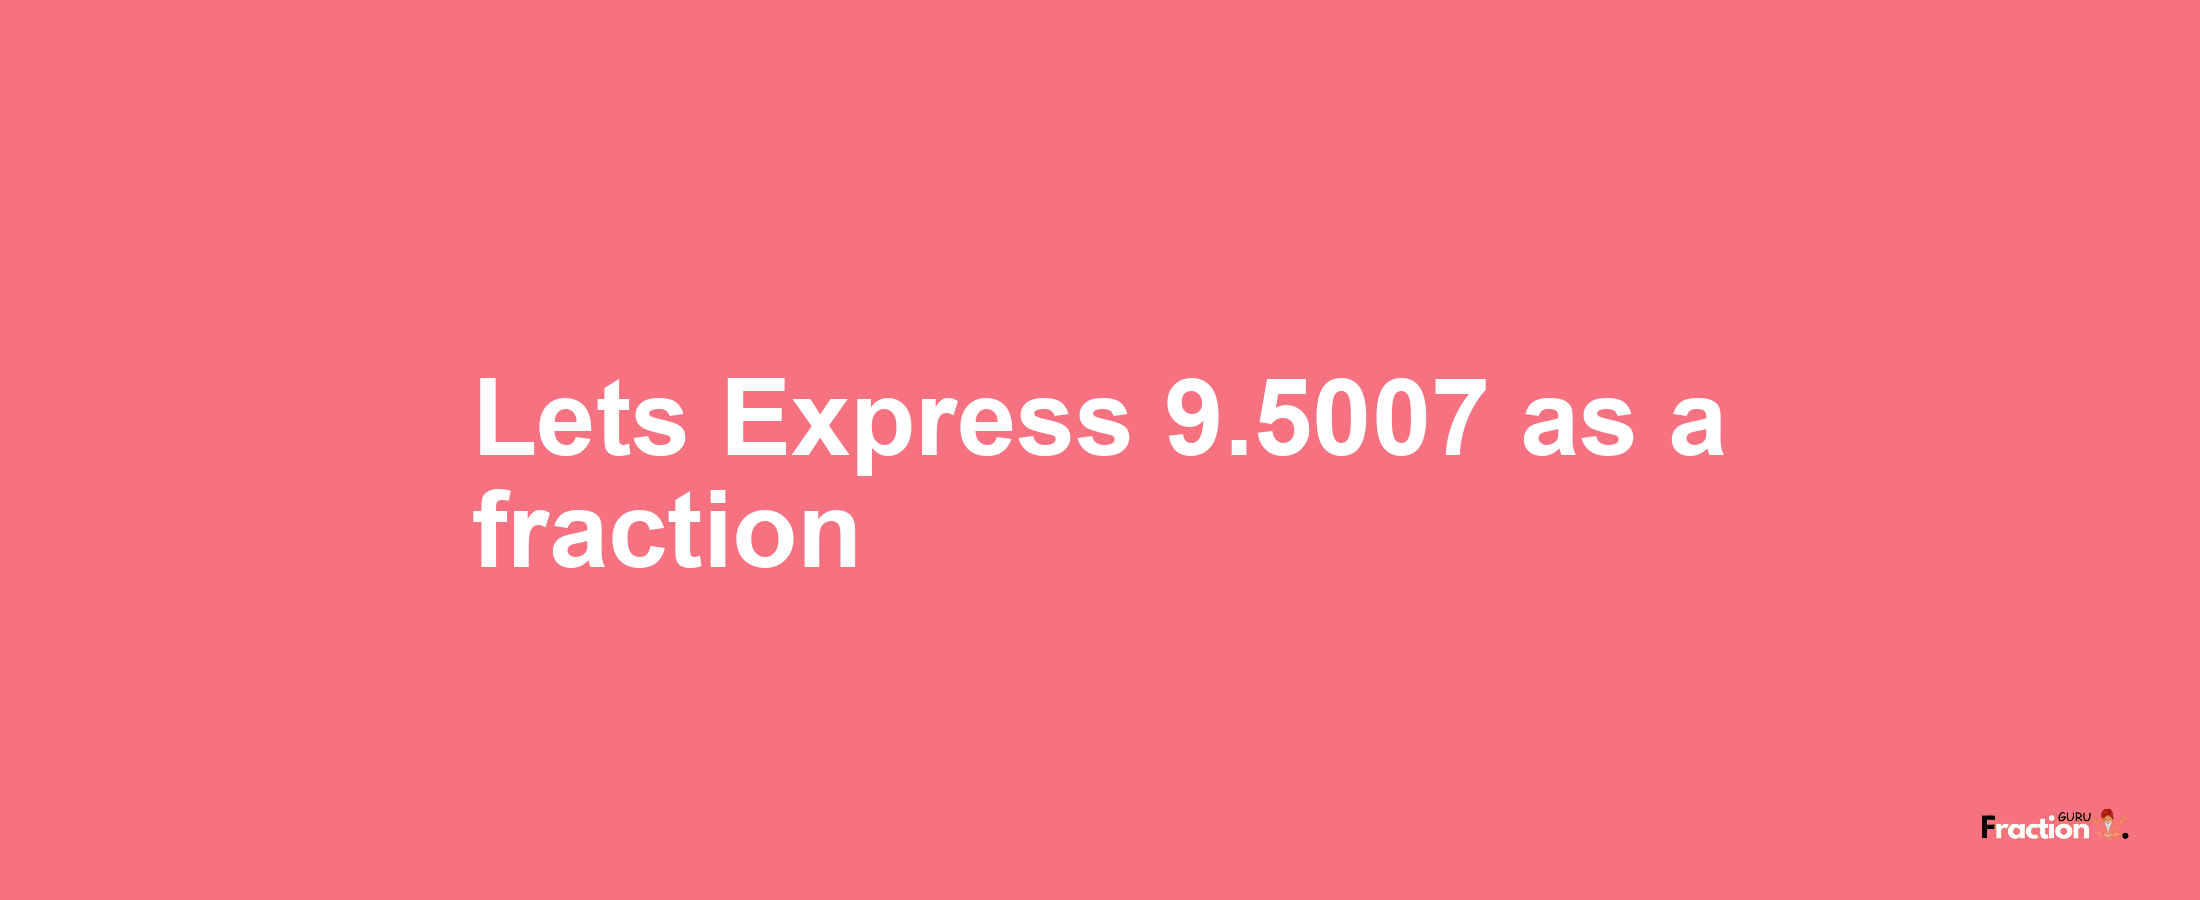 Lets Express 9.5007 as afraction